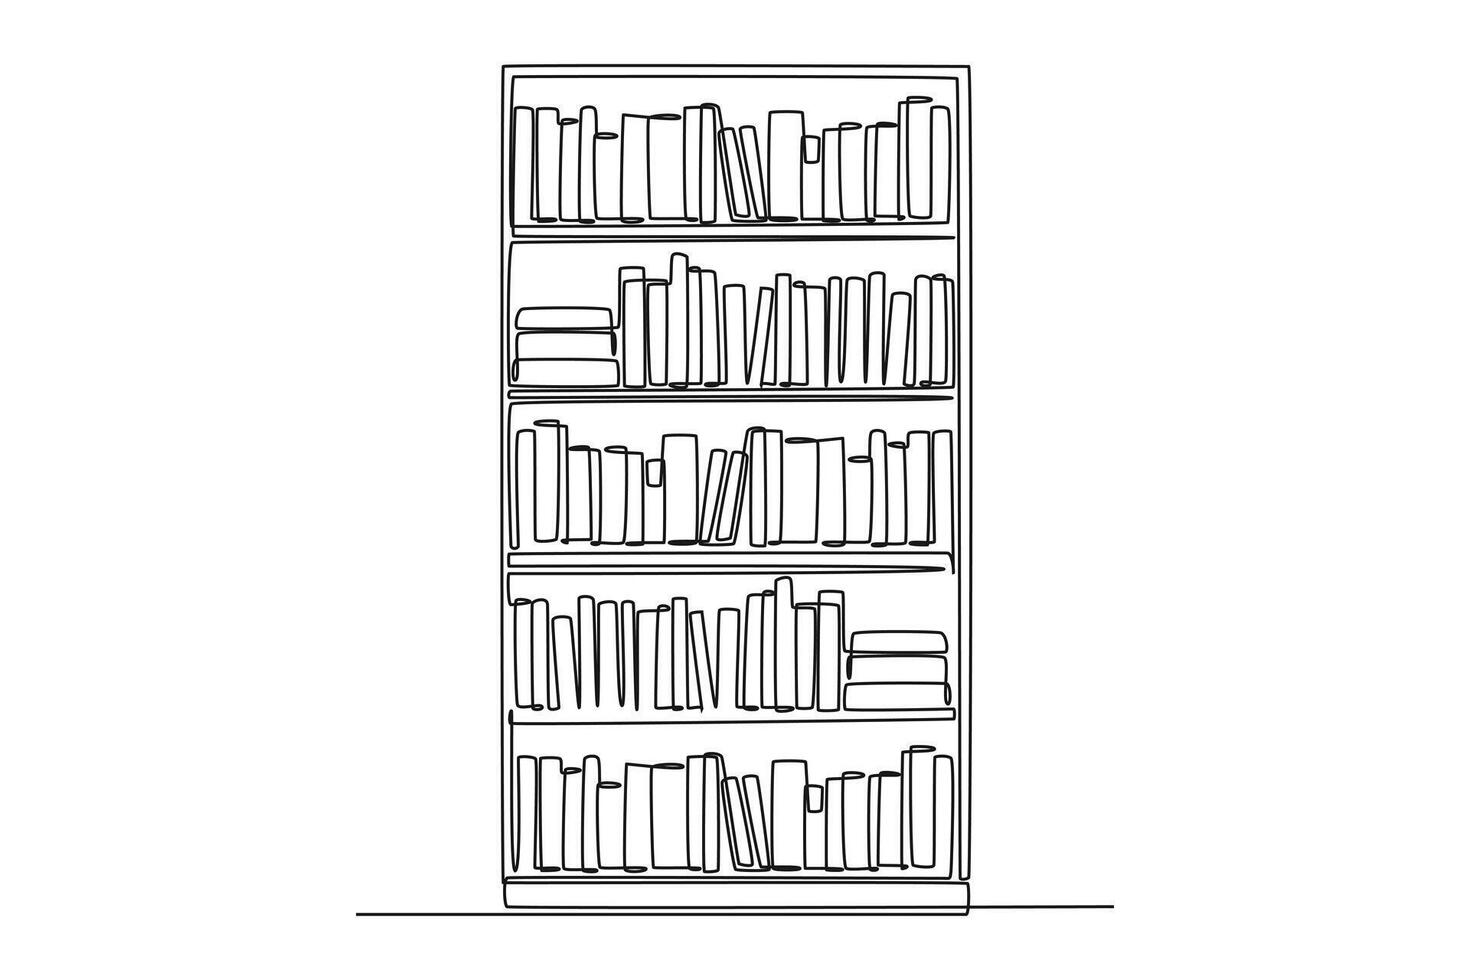 Continuous one line drawing library concept. Doodle illustration. vector